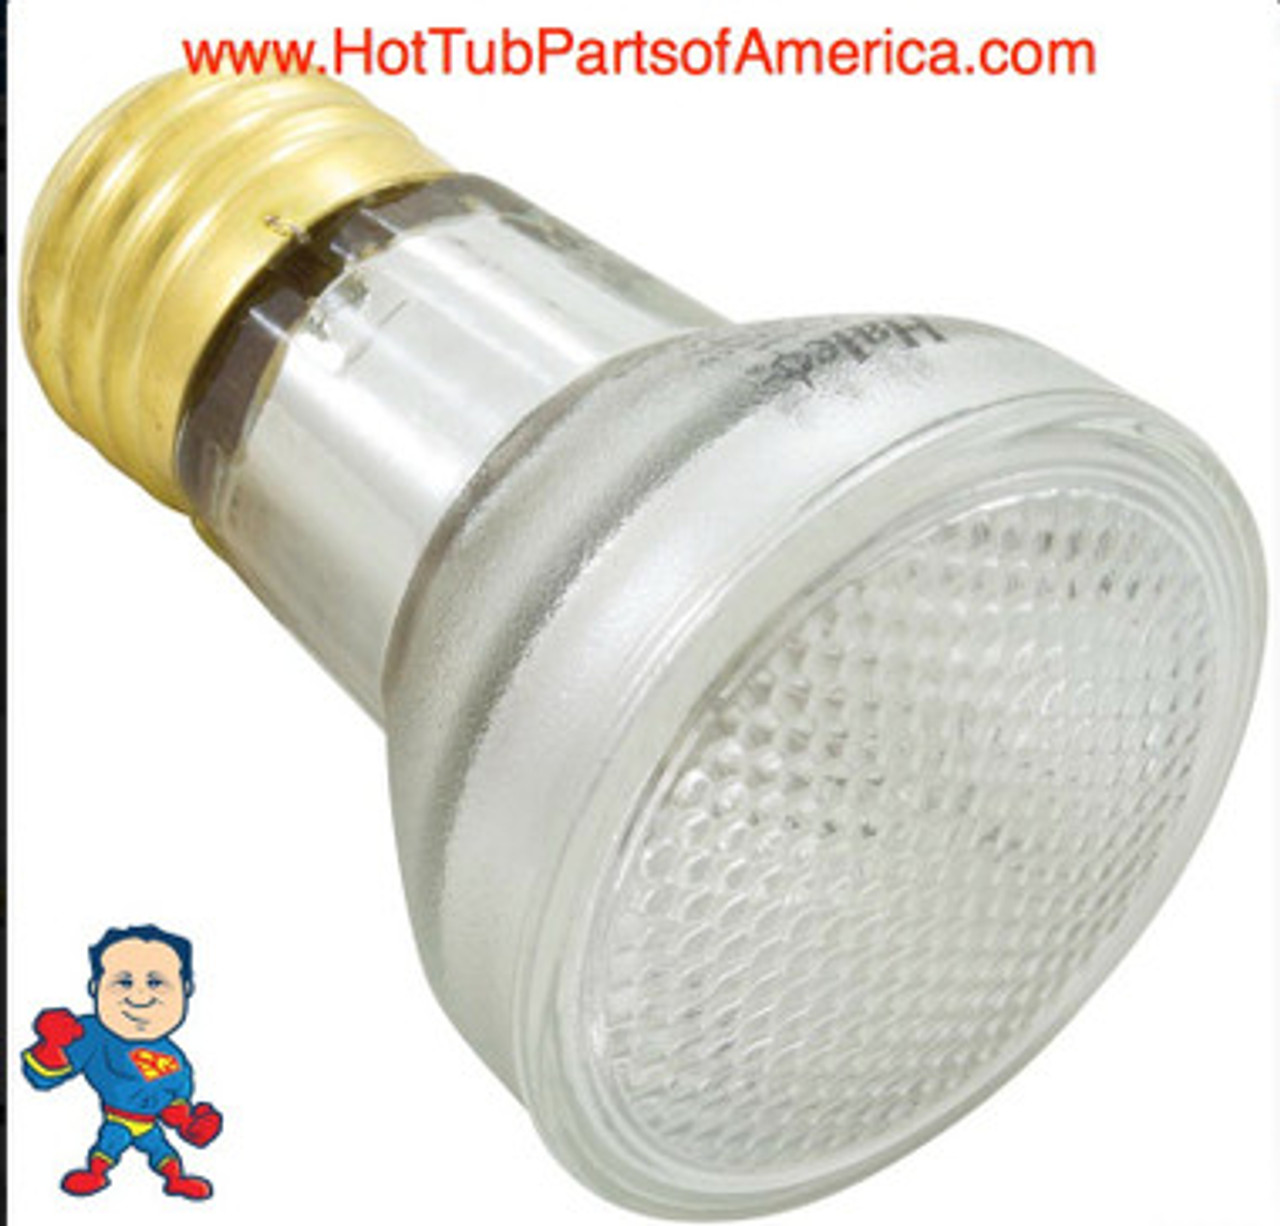 Replacement Bulb, R20, Flood Lamp, 100w (60w Halogen), 115v, Edison Style Screw in